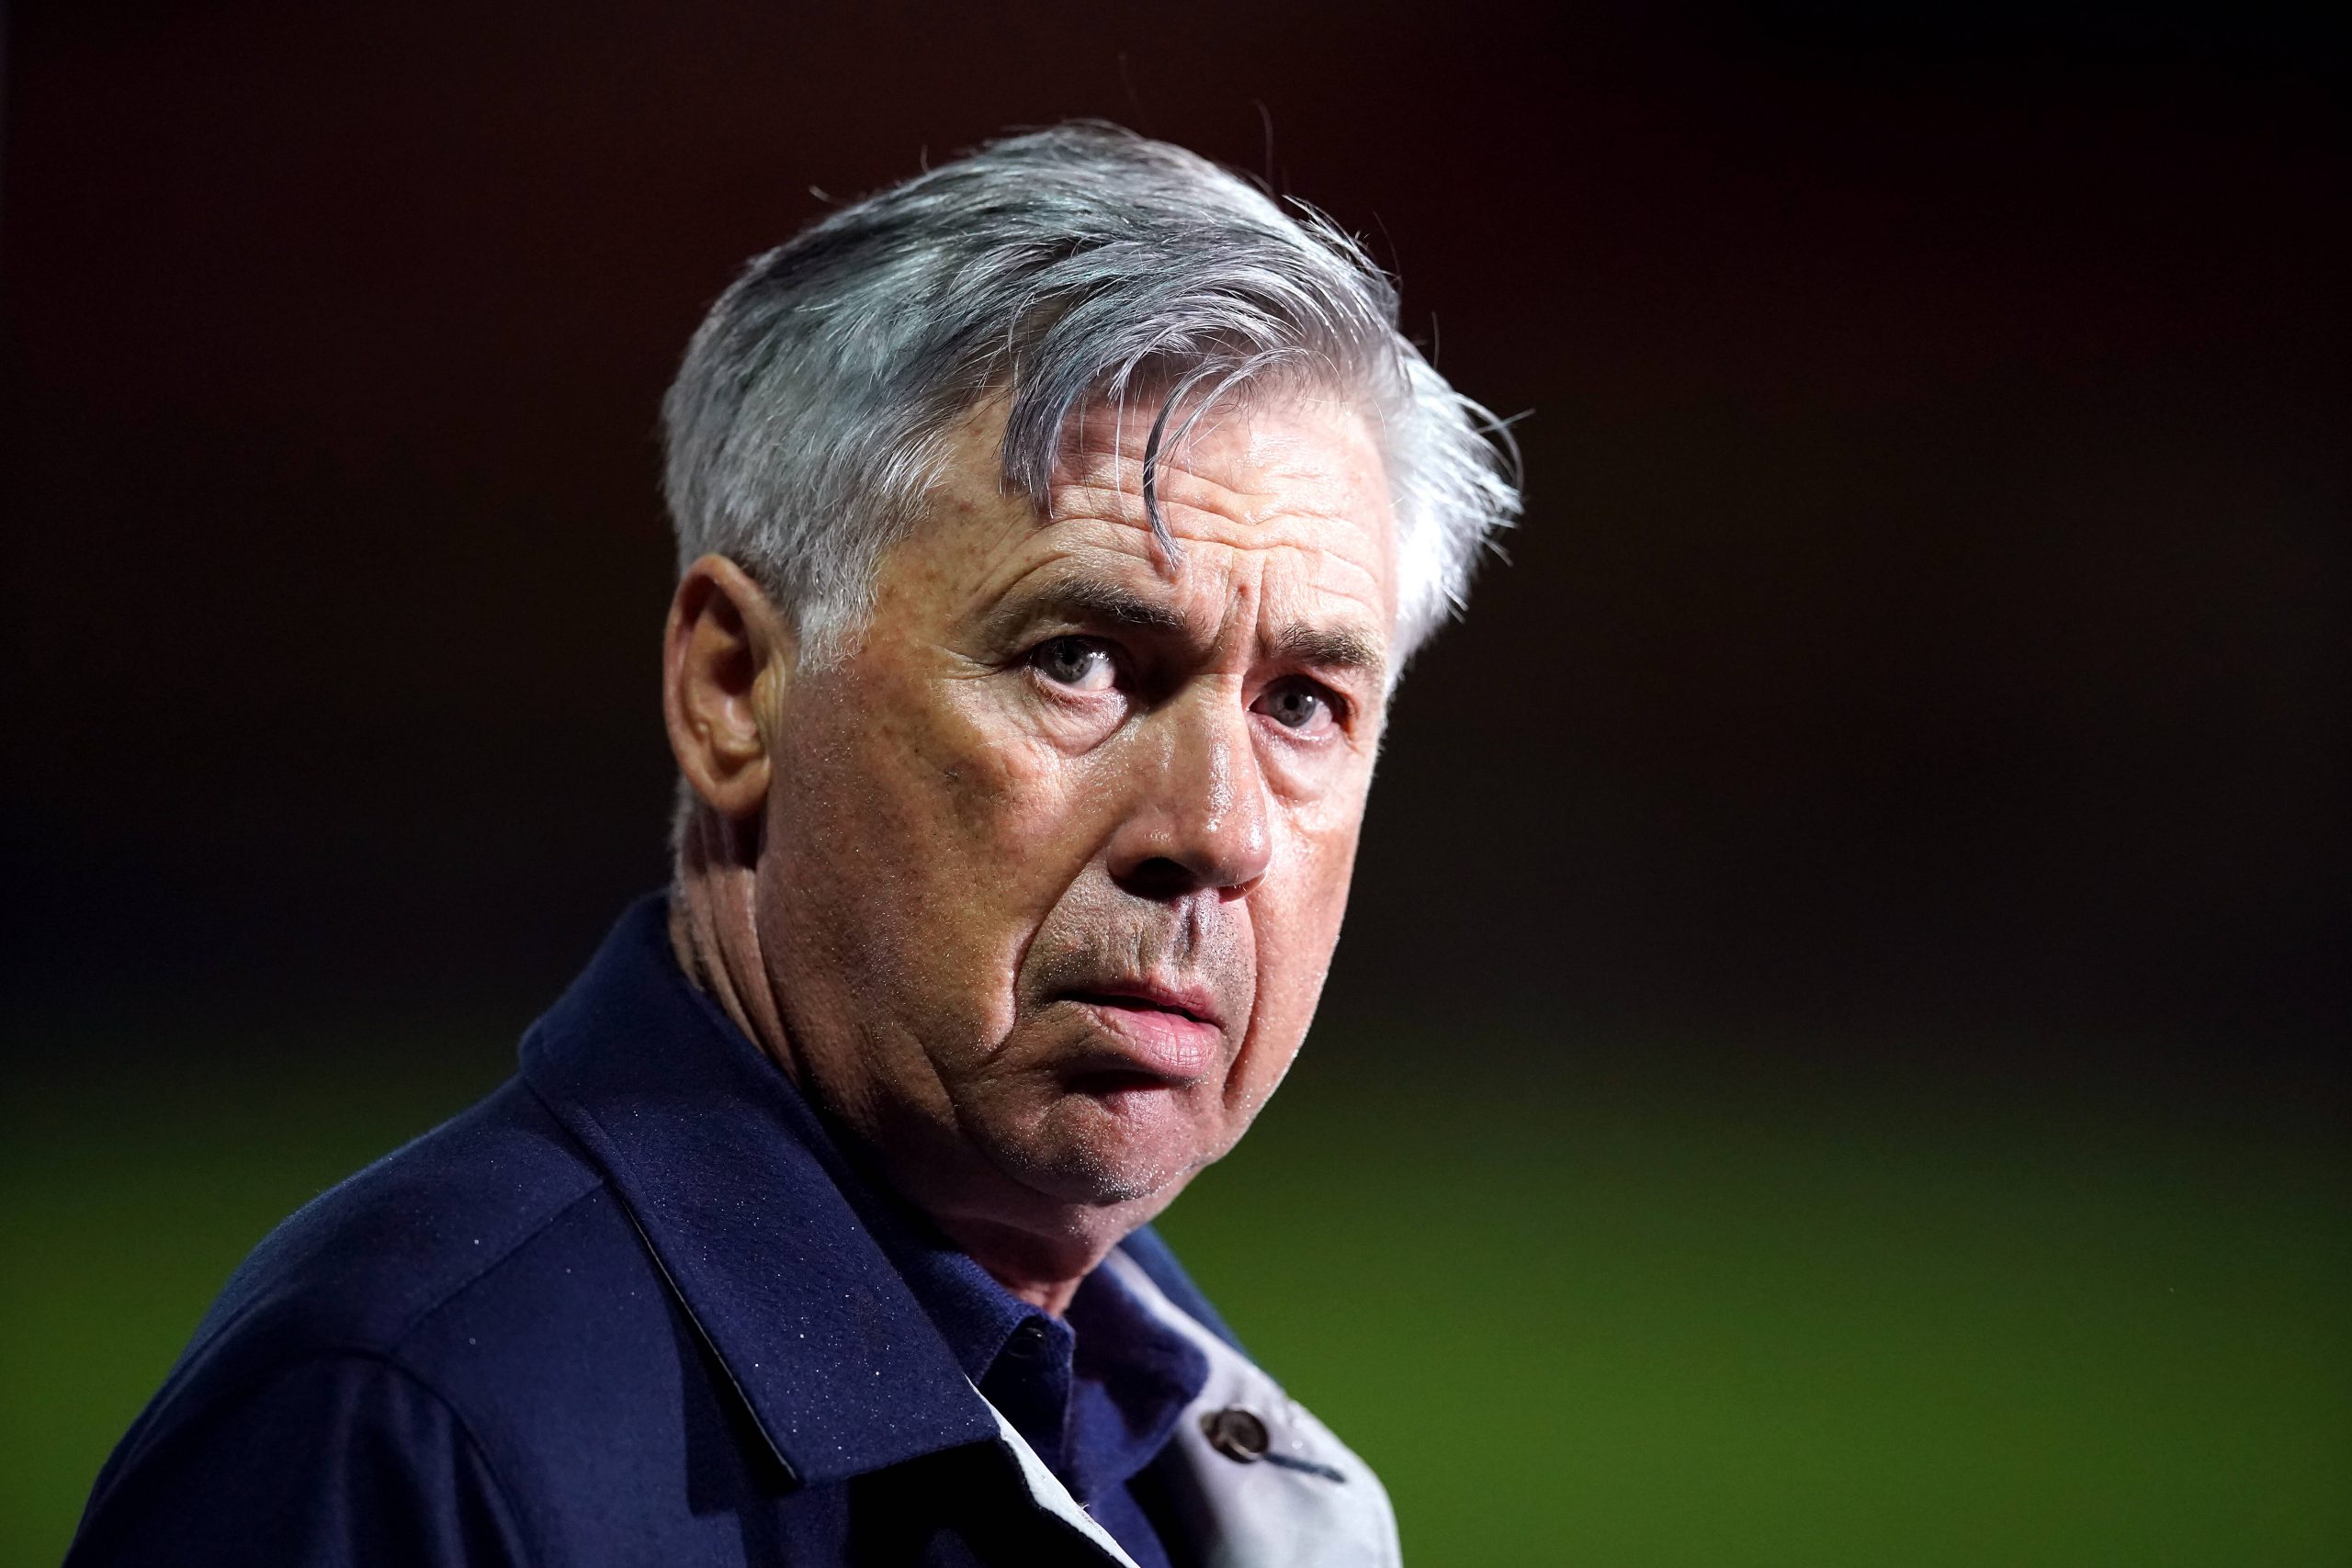 Carlo Ancelotti is the manager of Real Madrid and also served as Chelsea's manager in the past. Copyright: Dave Thompson 60126687